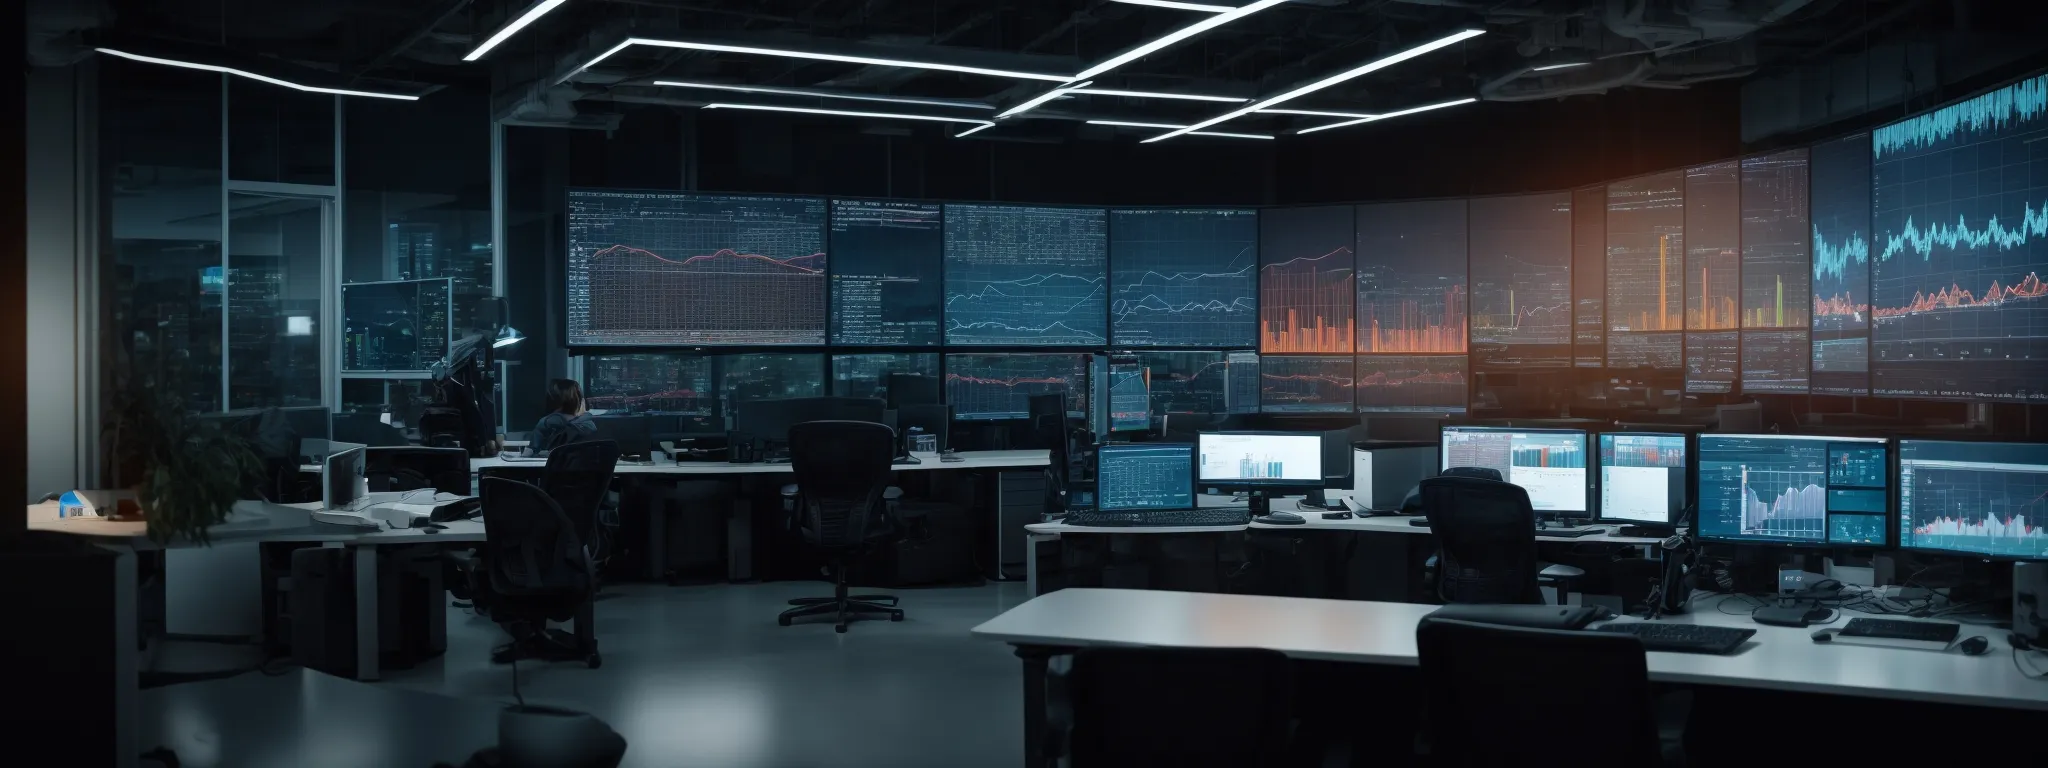 a futuristic office space with multiple glowing computer screens displaying graphs and data analytics.